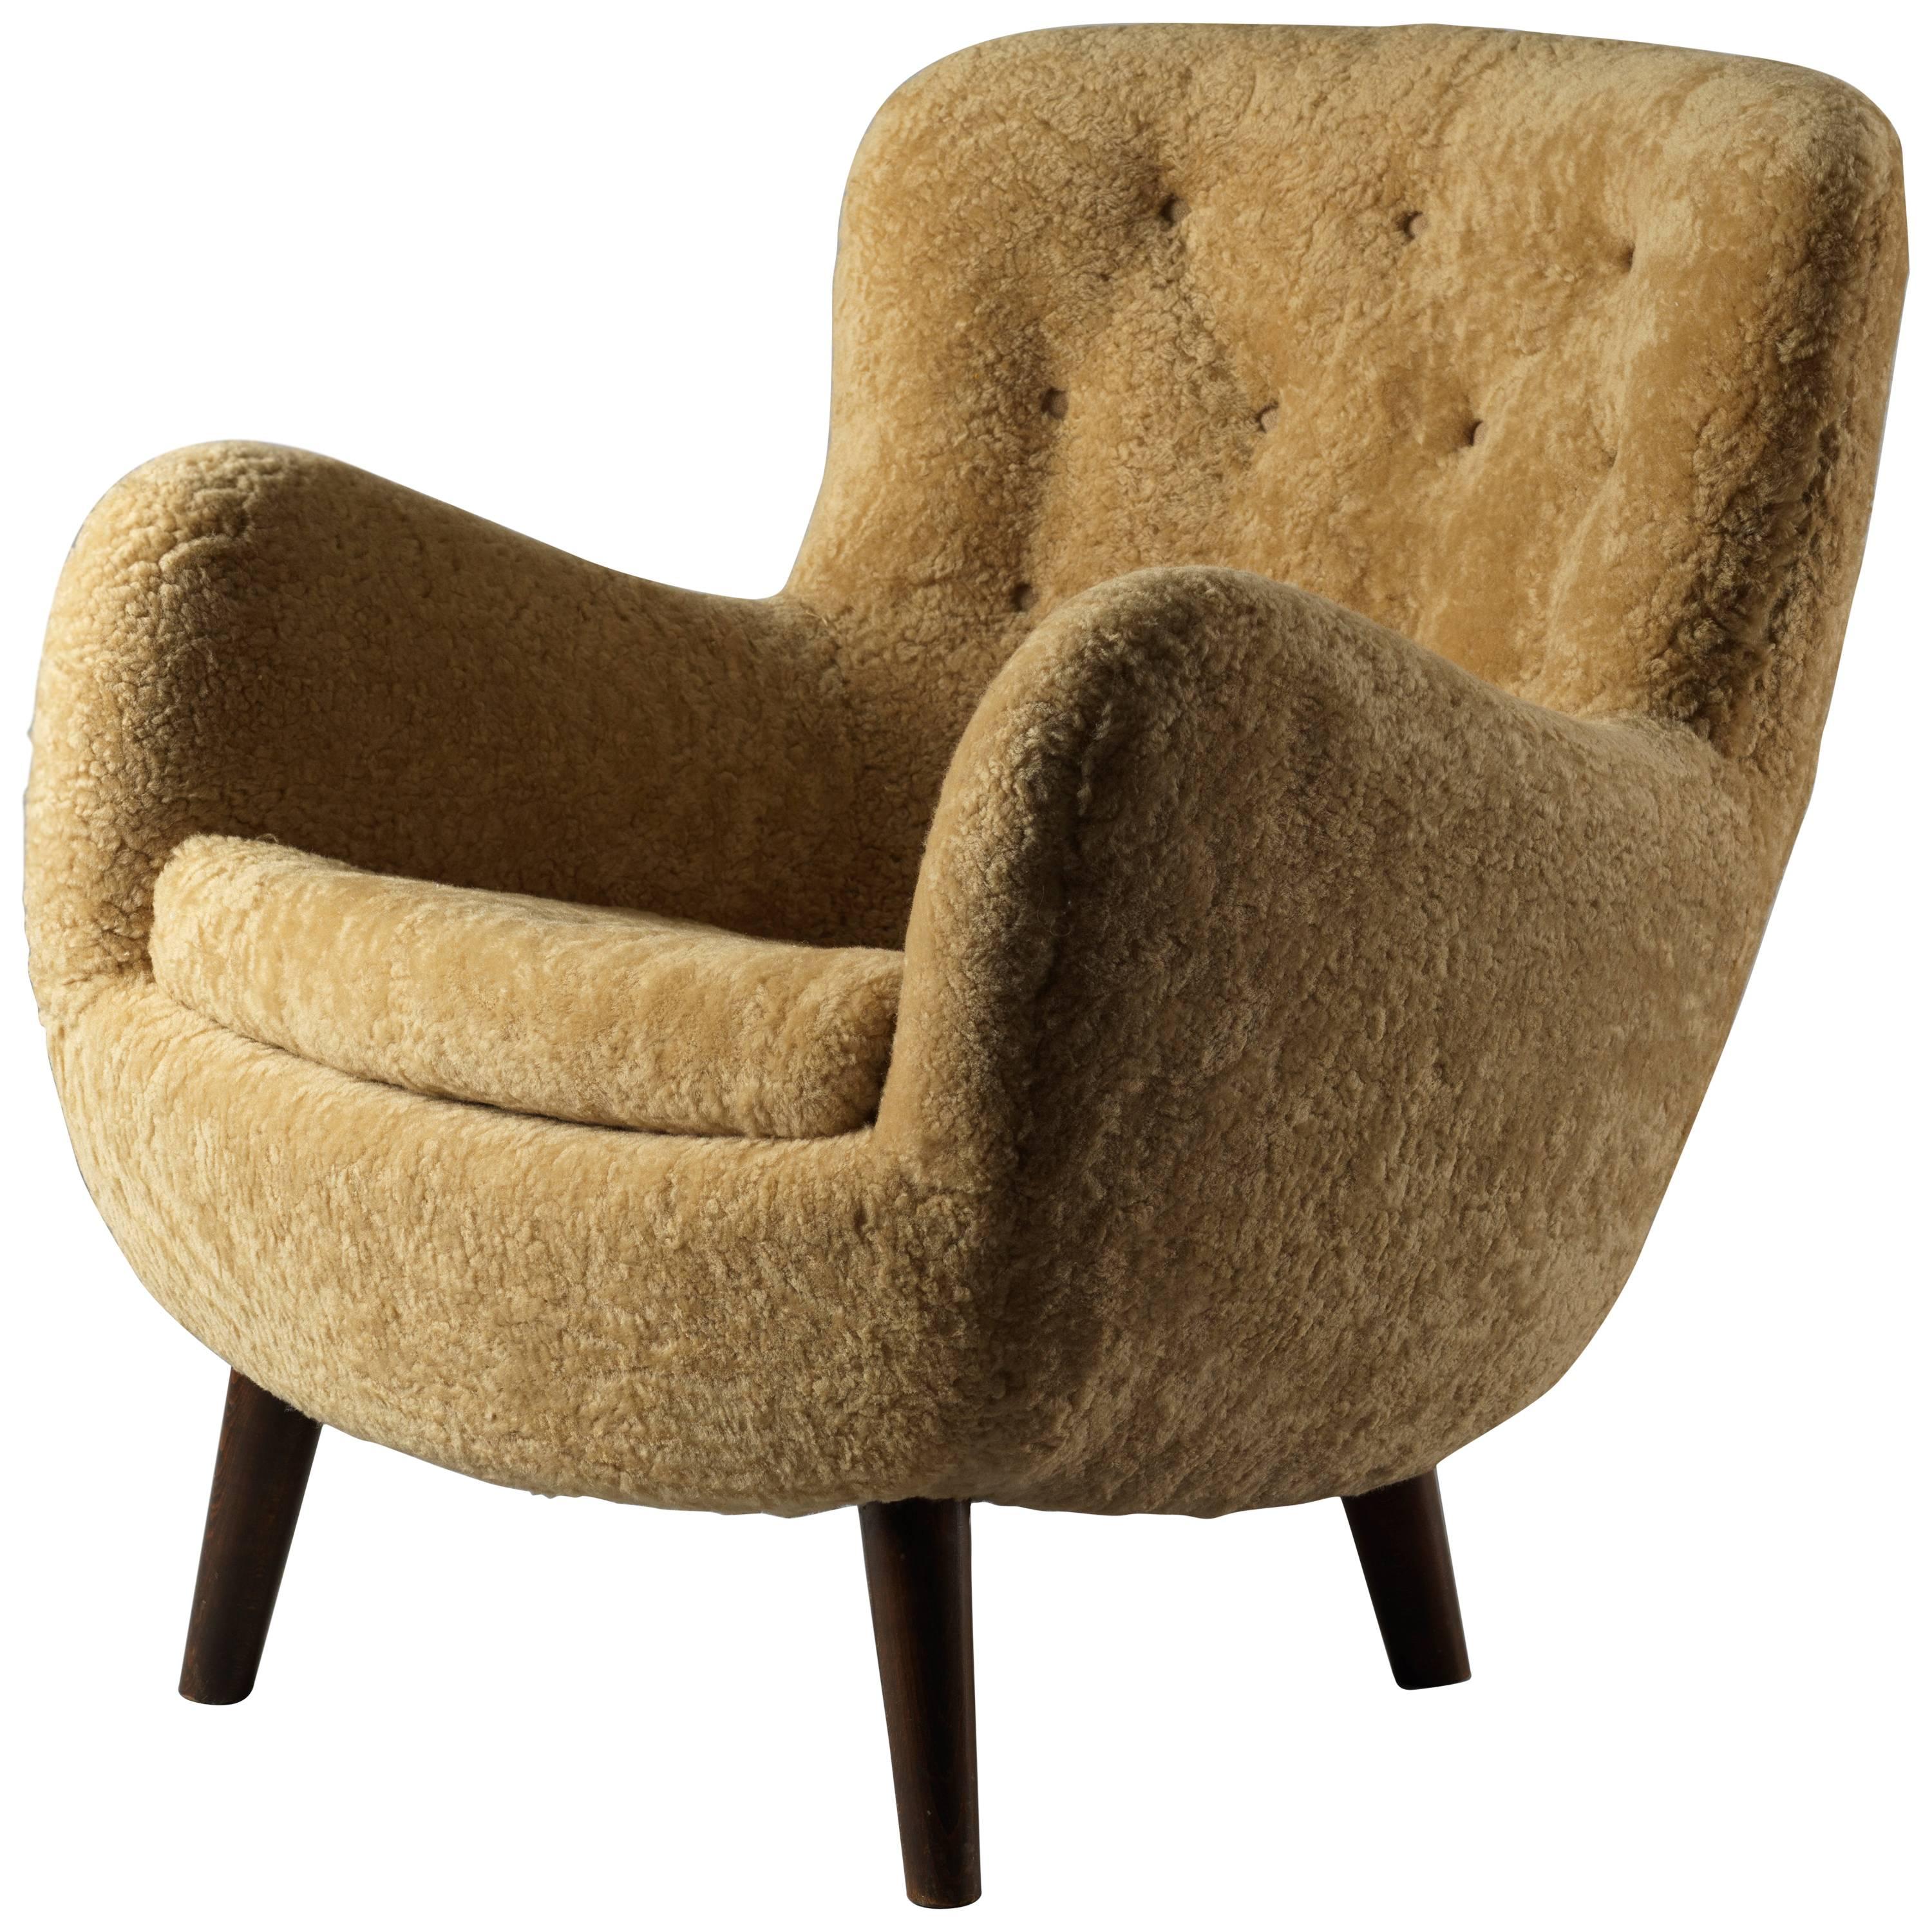 Frits Schlegel 'Attributed', Organic Lounge Chair, Natural Beige Lambskin, 1940s